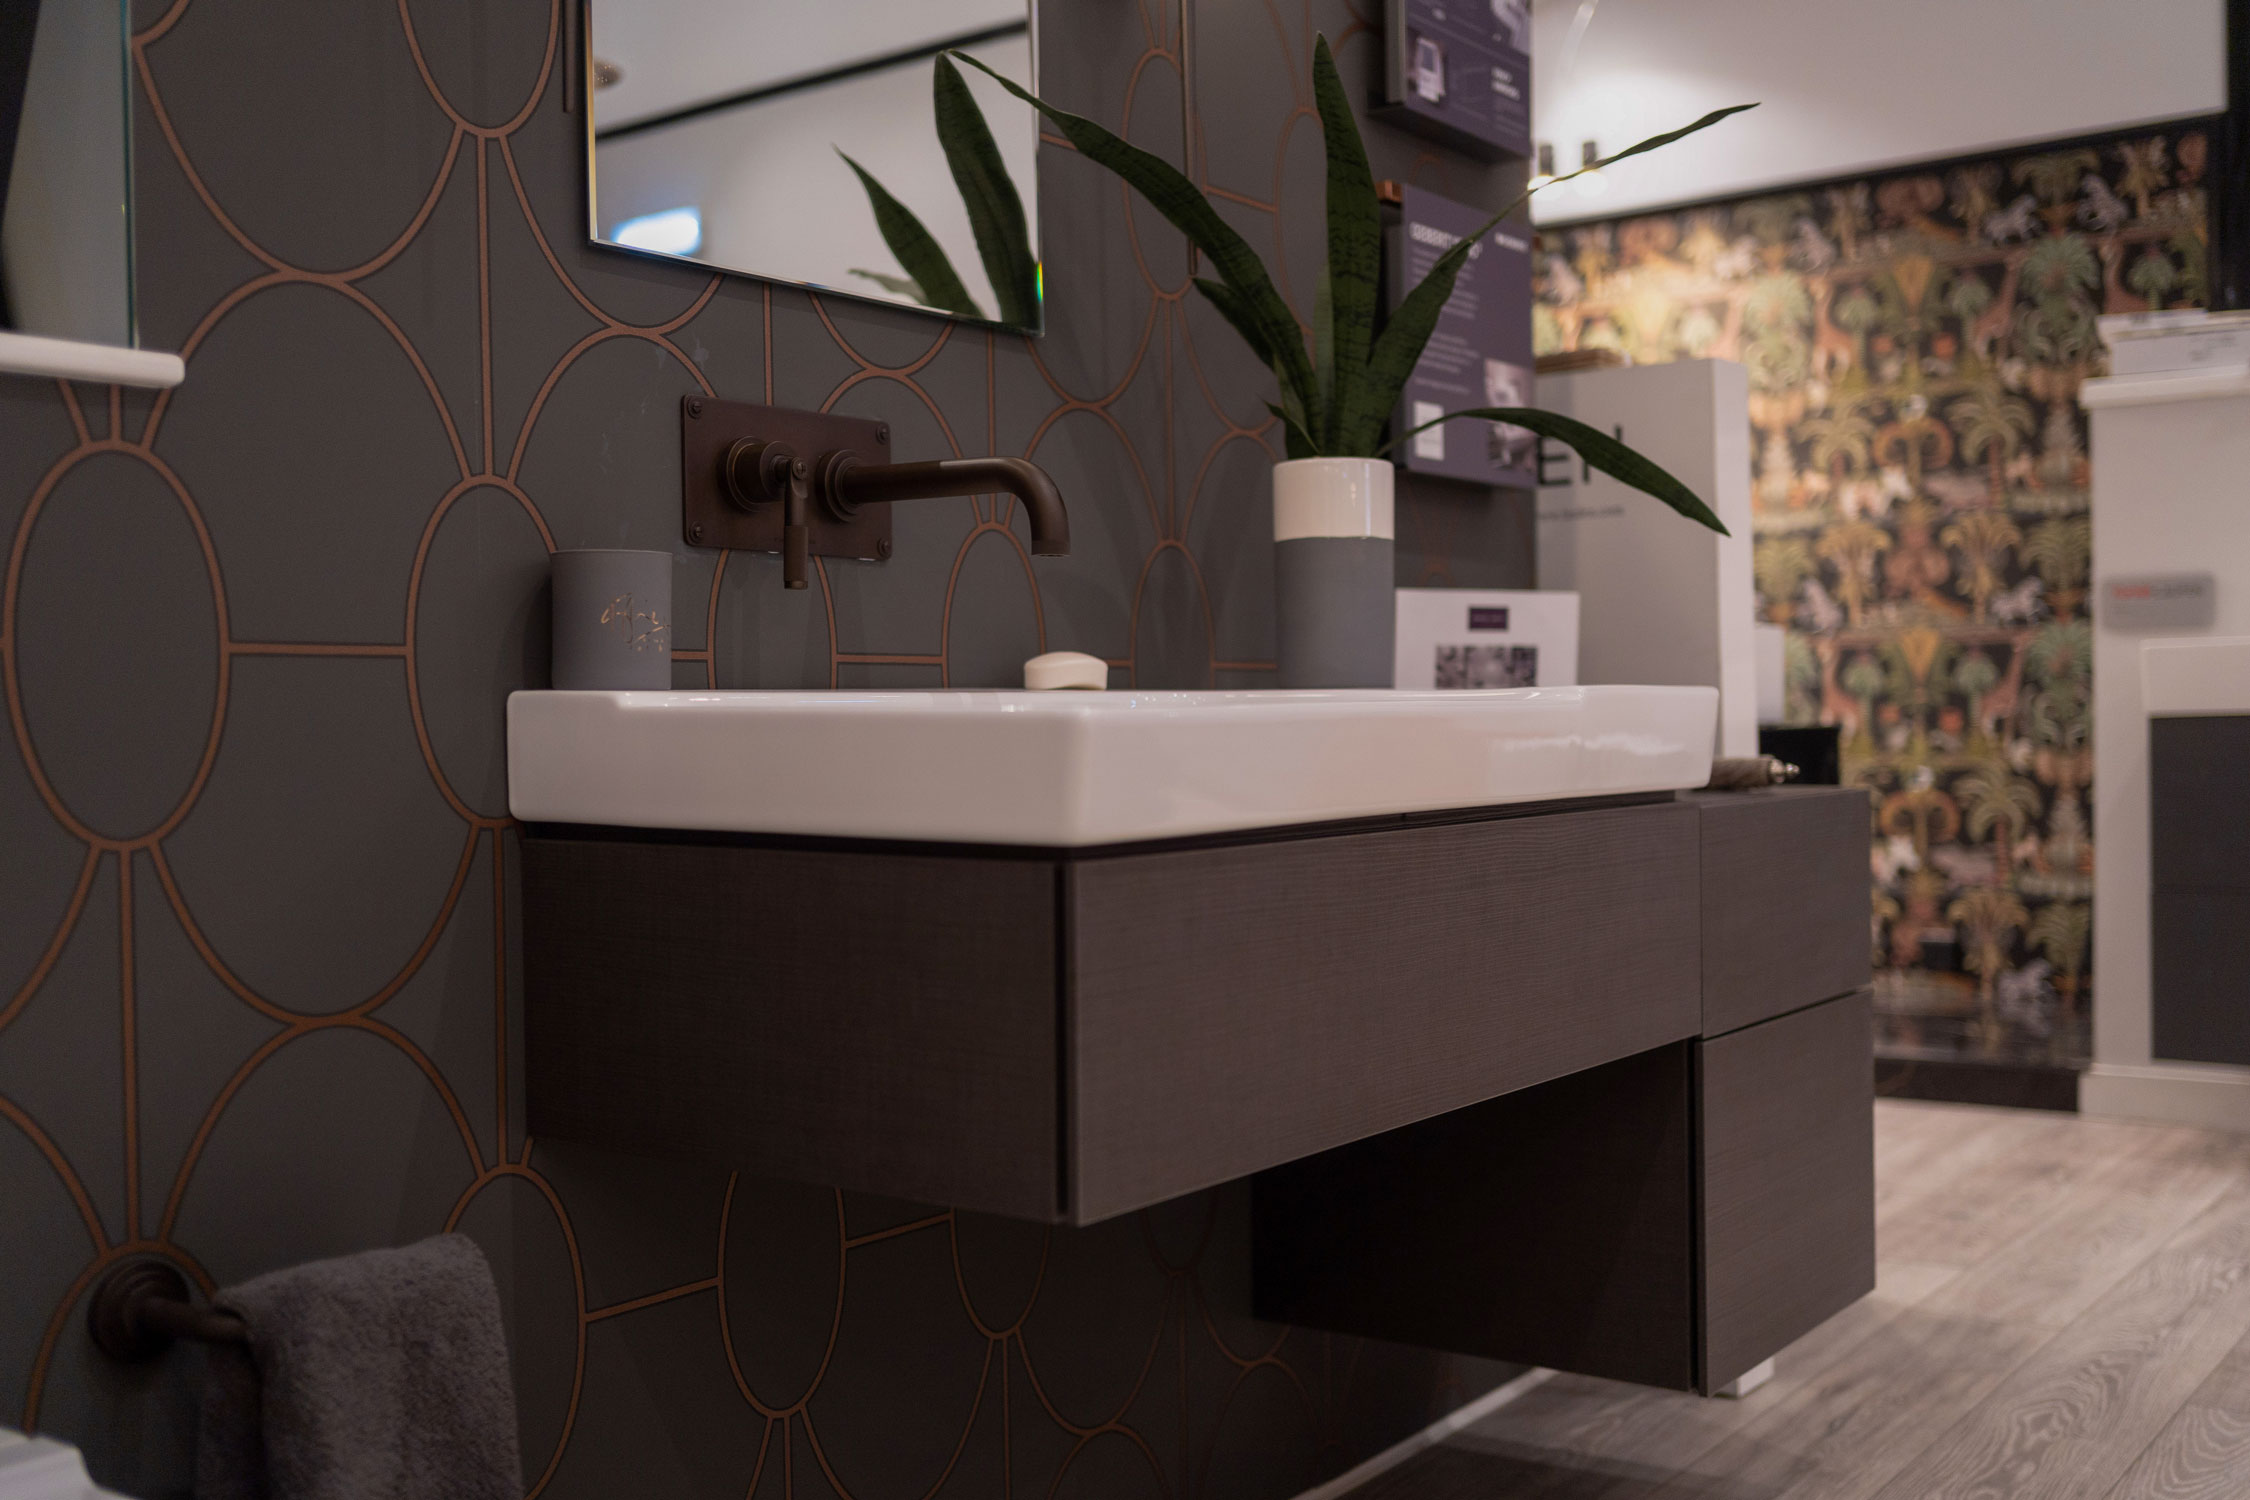 Showroom display of large sink area and brown and grey wallpaper.